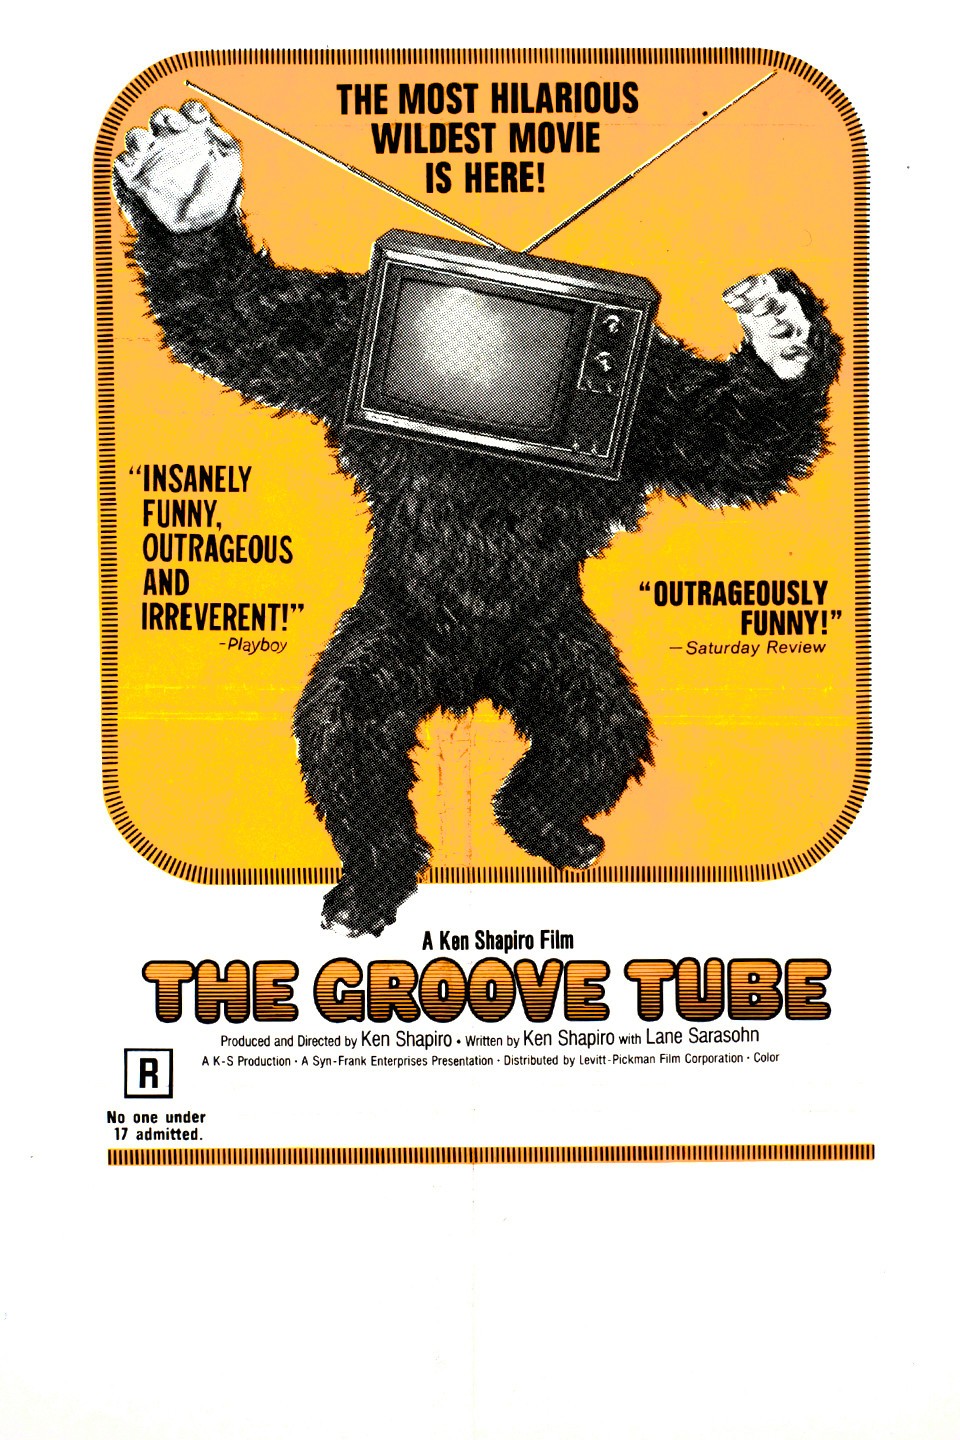 THE GROOVE TUBE (1974) Trailer 